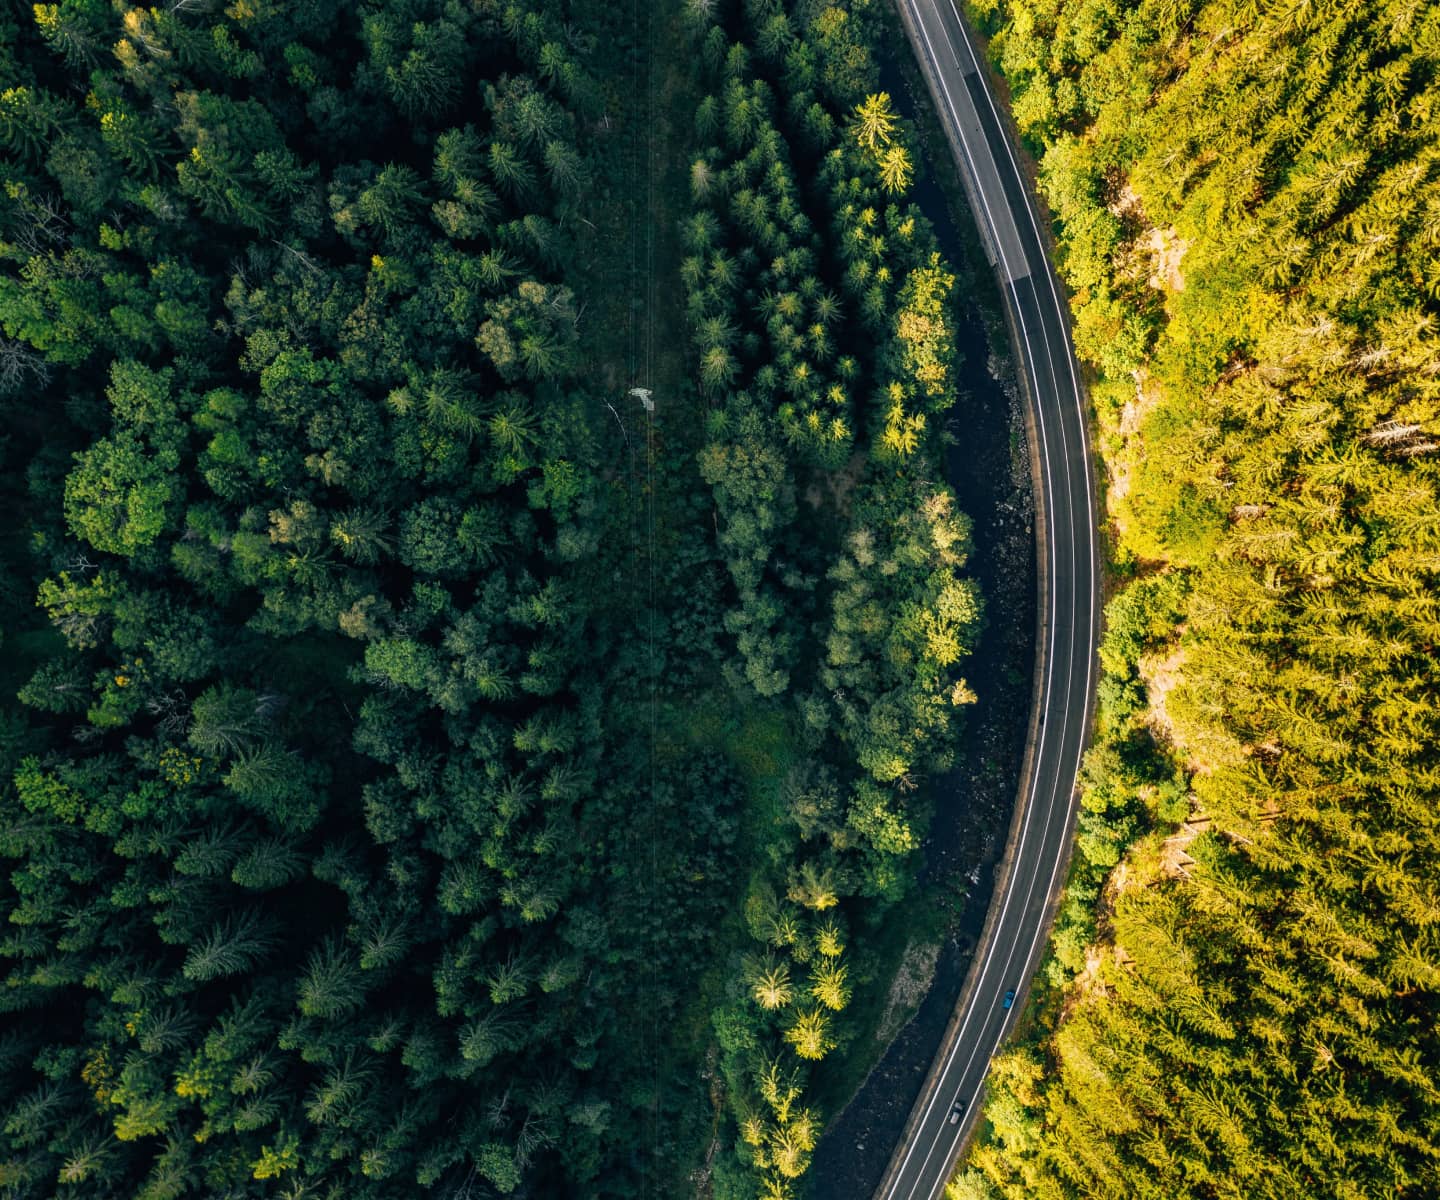 An overhead view of a curved road in a green forest.